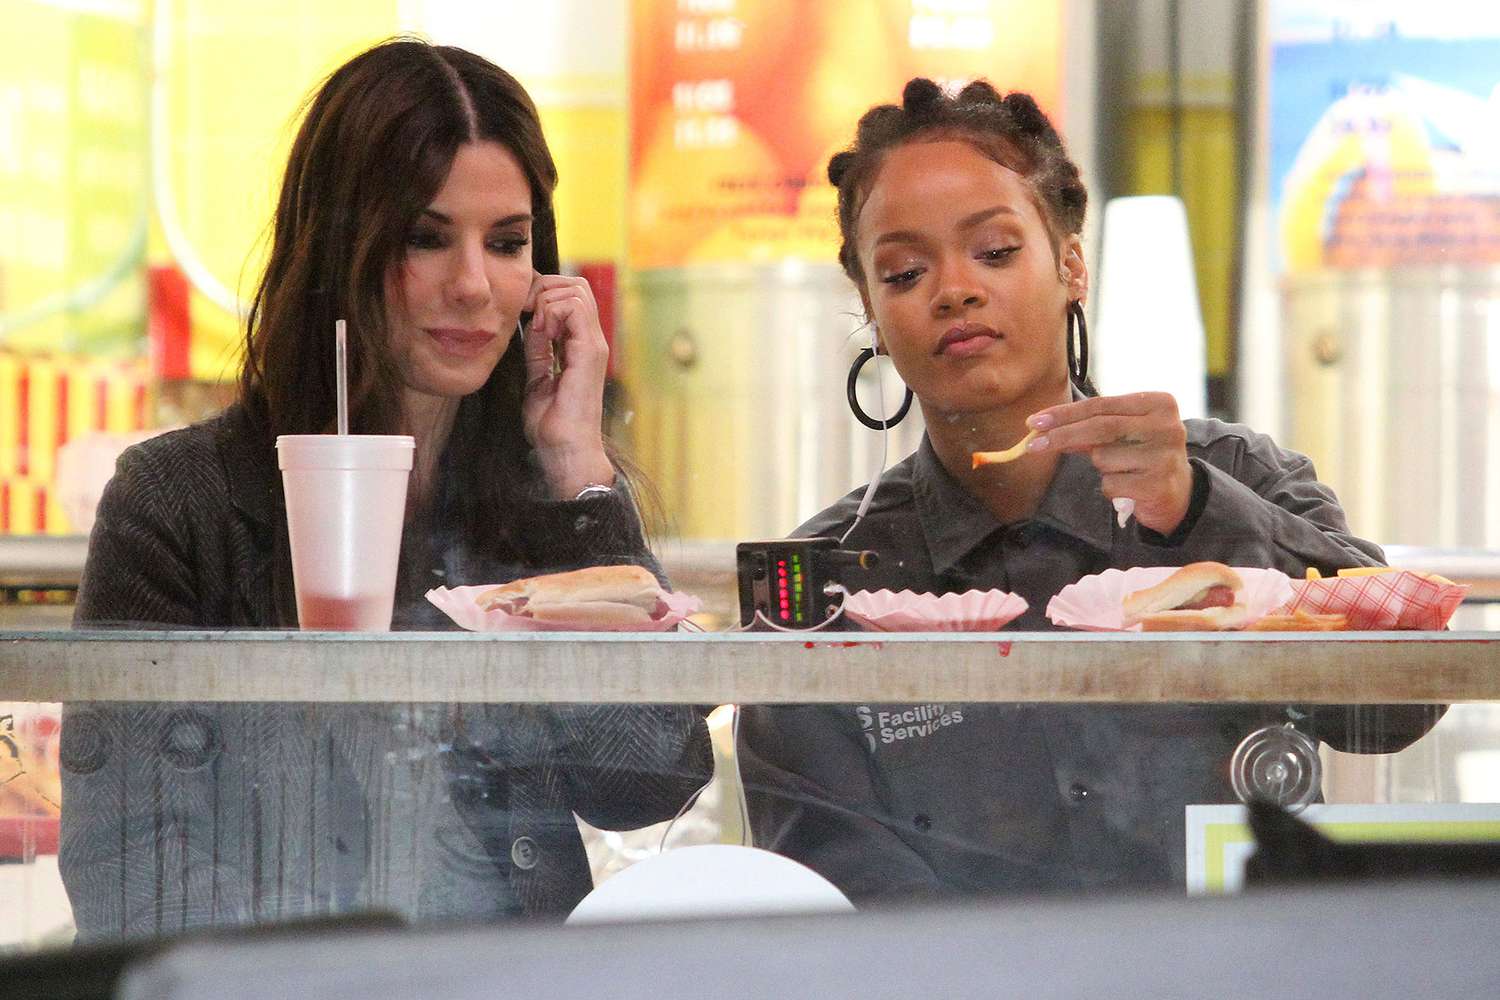 Sandra Bullock and Rihanna eat hot dogs and french fries on the set of OCEANS 8